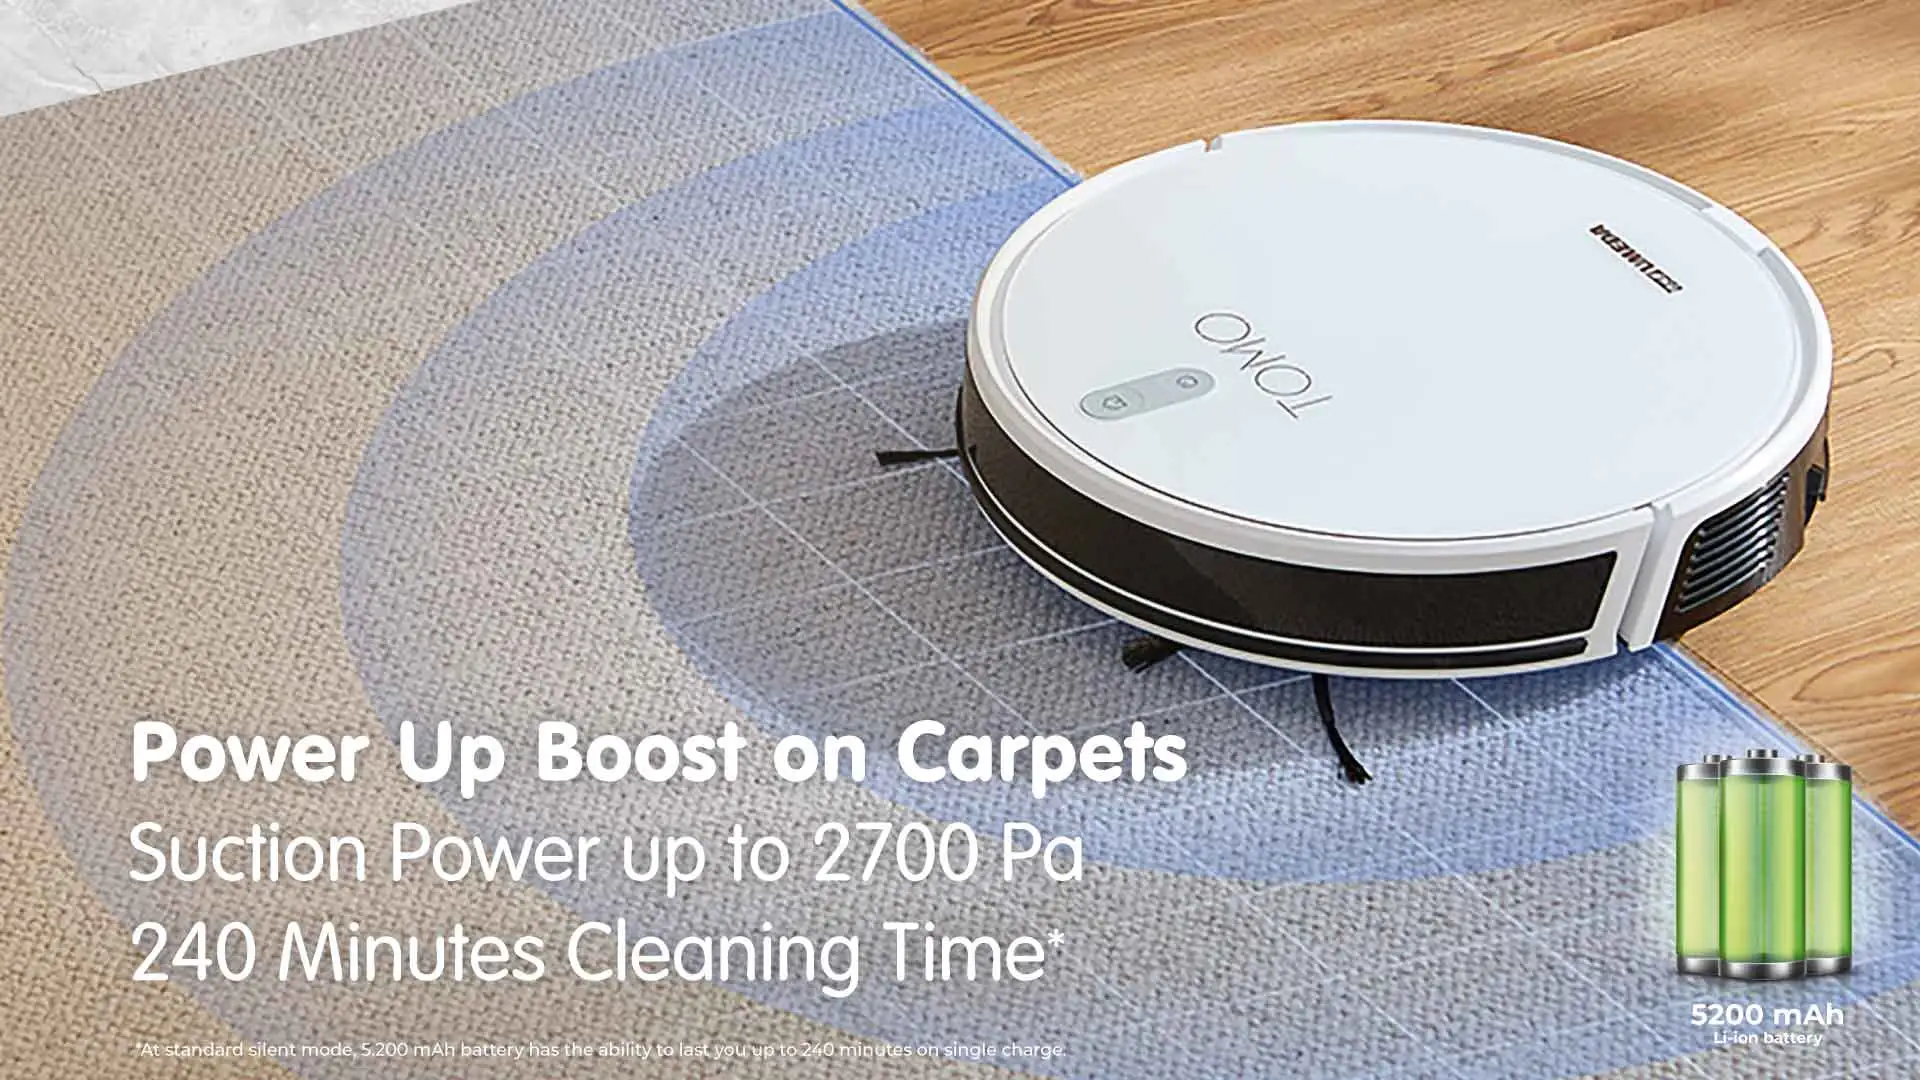 Tomo R2 Power Up Boost on Carpets, Suction Power Up to 2700 Pa, 240 Minutes Cleaning Time